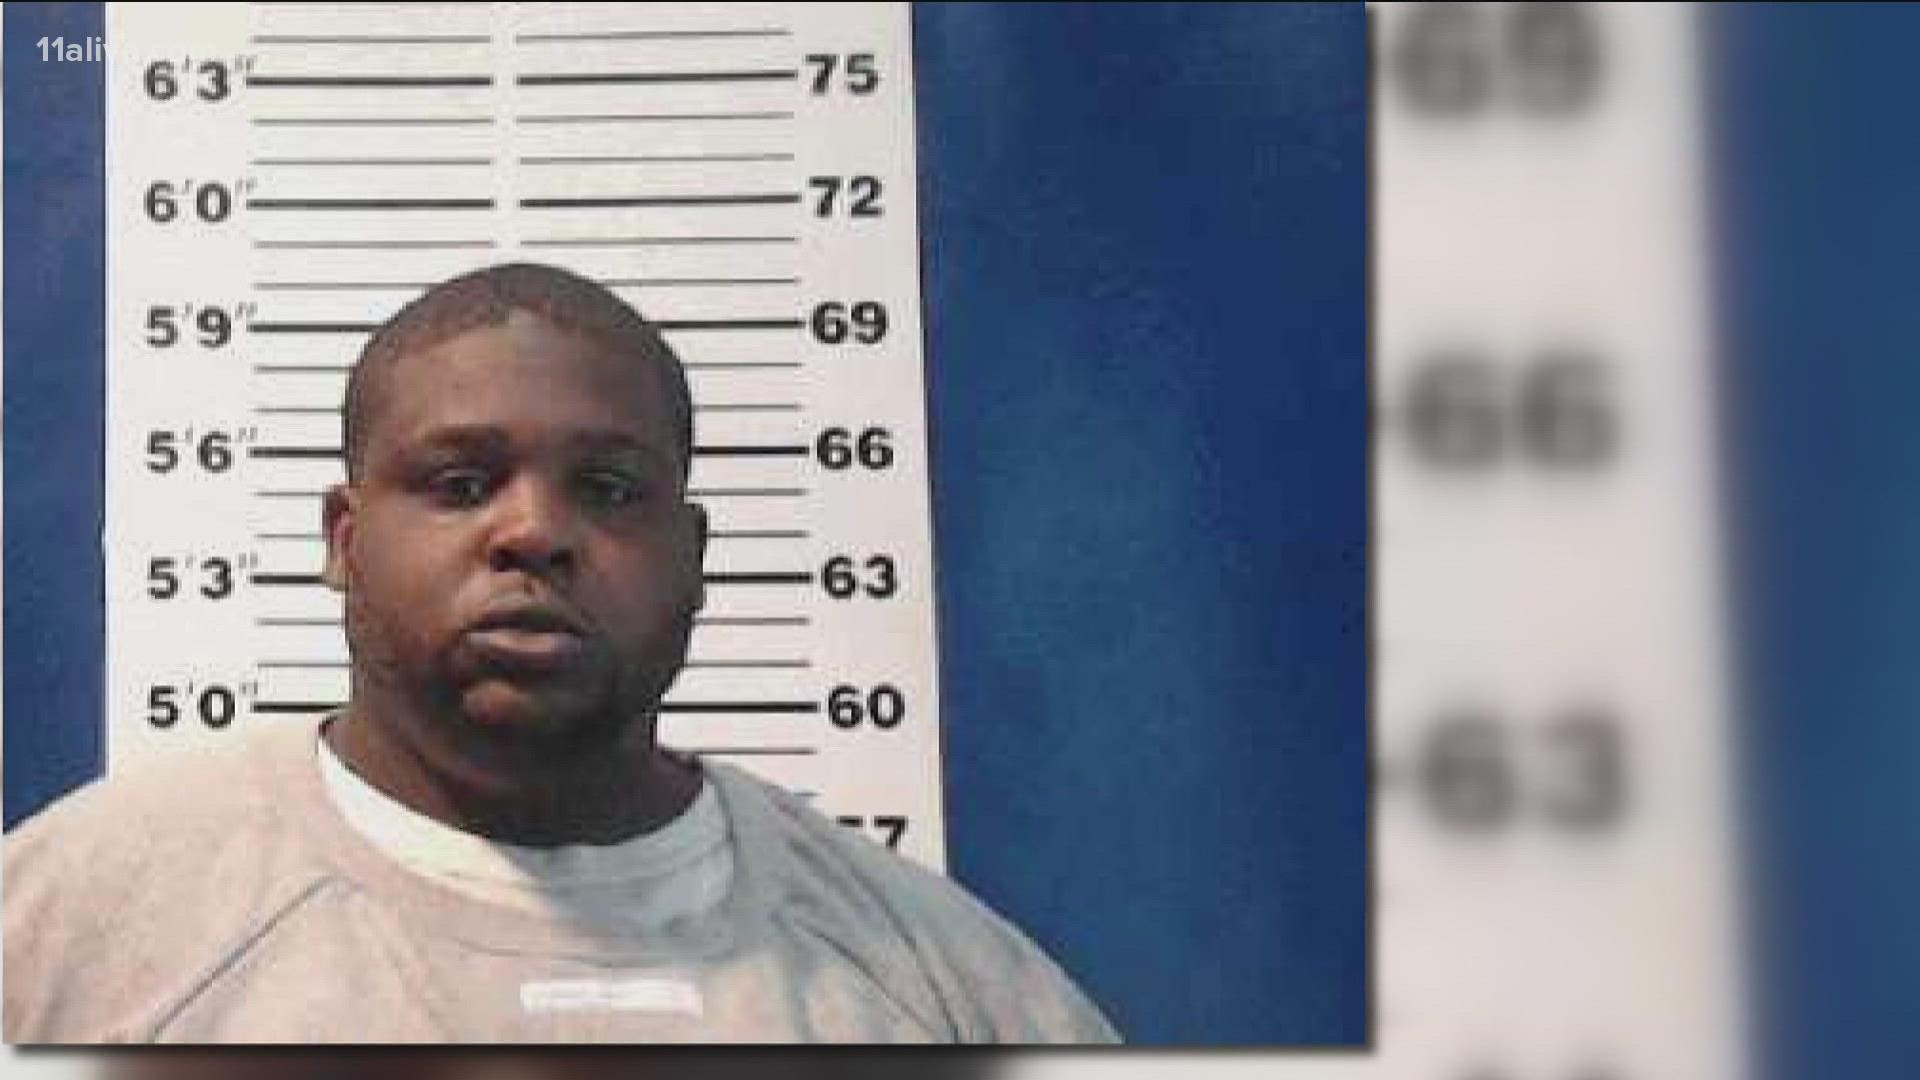 The man accused of kidnapping and killing a woman in Atlanta was out on probation for child molestation when the crime happened.